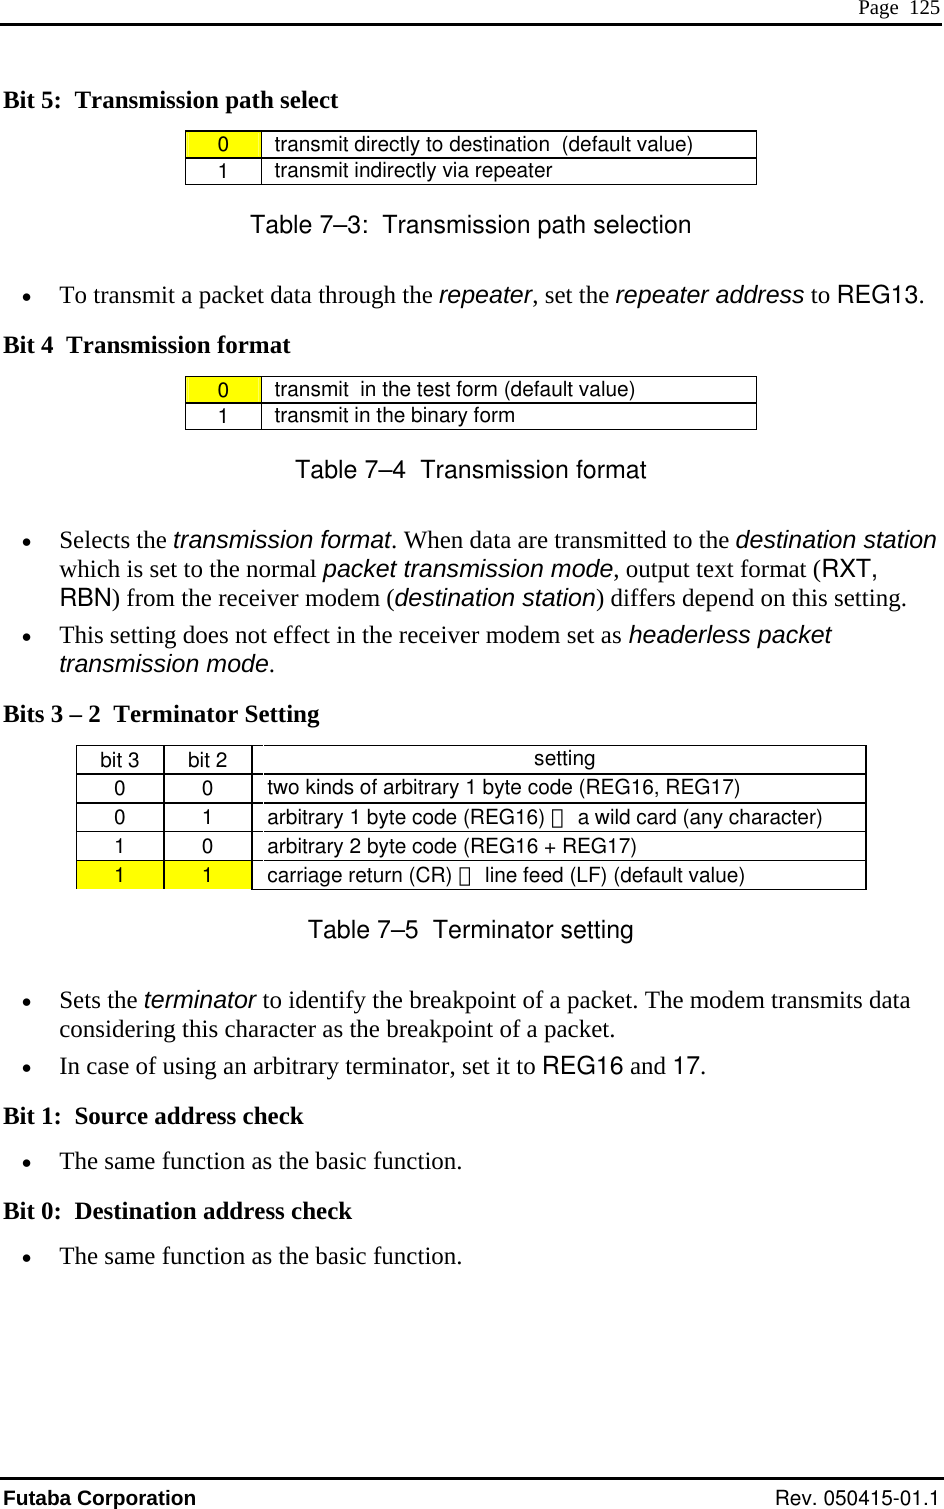  Page  125 Bit 5:  Transmission path select 0   transmit directly to destination  (default value) 1   transmit indirectly via repeater Table 7–3:  Transmission path selection •   to REG13.  Bit 4  Transmission formatTo transmit a packet data through the repeater, set the repeater address 0   transmit  in the test form (default value) 1   transmit in the binary form T•  Se cts th n format. When data are transmitted to the destination station xt format (RXT, RBN) fro  modem (destination station) differs depend on this setting. •  This setting does not effect in the receiver modem set as headerless packet transmission mode. Bits 3 – 2  Terminator Setting able 7–4  Transmission format le e transmissiowhich is set to the normal packet transmission mode, output tem the receiverbit 3  bit 2   setting 0  0   two kinds of arbitrary 1 byte code (REG16, REG17) 0  1   arbitrary 1 byte code (REG16) ＋ a wild card (any character) 1  0   arbitrary 2 byte code (REG16 + REG17) 1  1   carriage return (CR) ＋ line feed (LF) (default value) Table 7–5  Terminator setting •  Sets the terminator to identify the breakpoint of a packet. The modem transmits data considering this character as the breakpoint of a packet. •  In case of using an arbitrary terminator, set it to REG16 and 17.  Bit 1:  Source address check •  The same function as the basic function.  Bit 0:  Destination address check •  The same function as the basic function.    Futaba Corporation Rev. 050415-01.1 